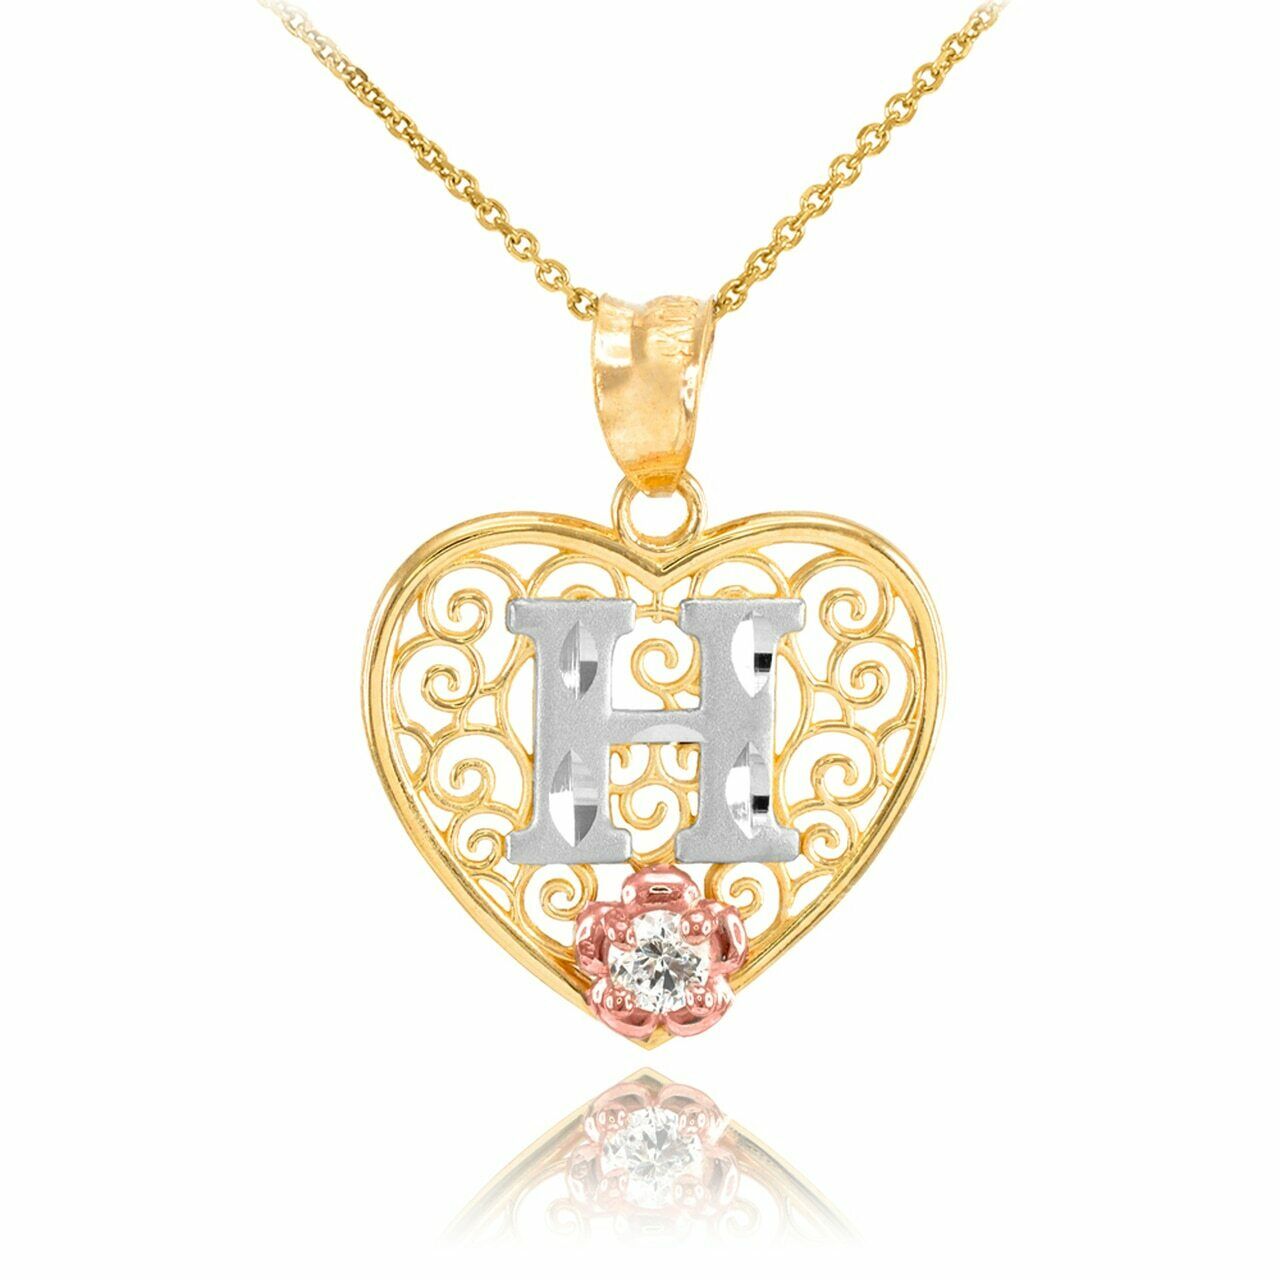 10k Solid Gold Initial Letter H Heart Filigree CZ Pendant Necklace